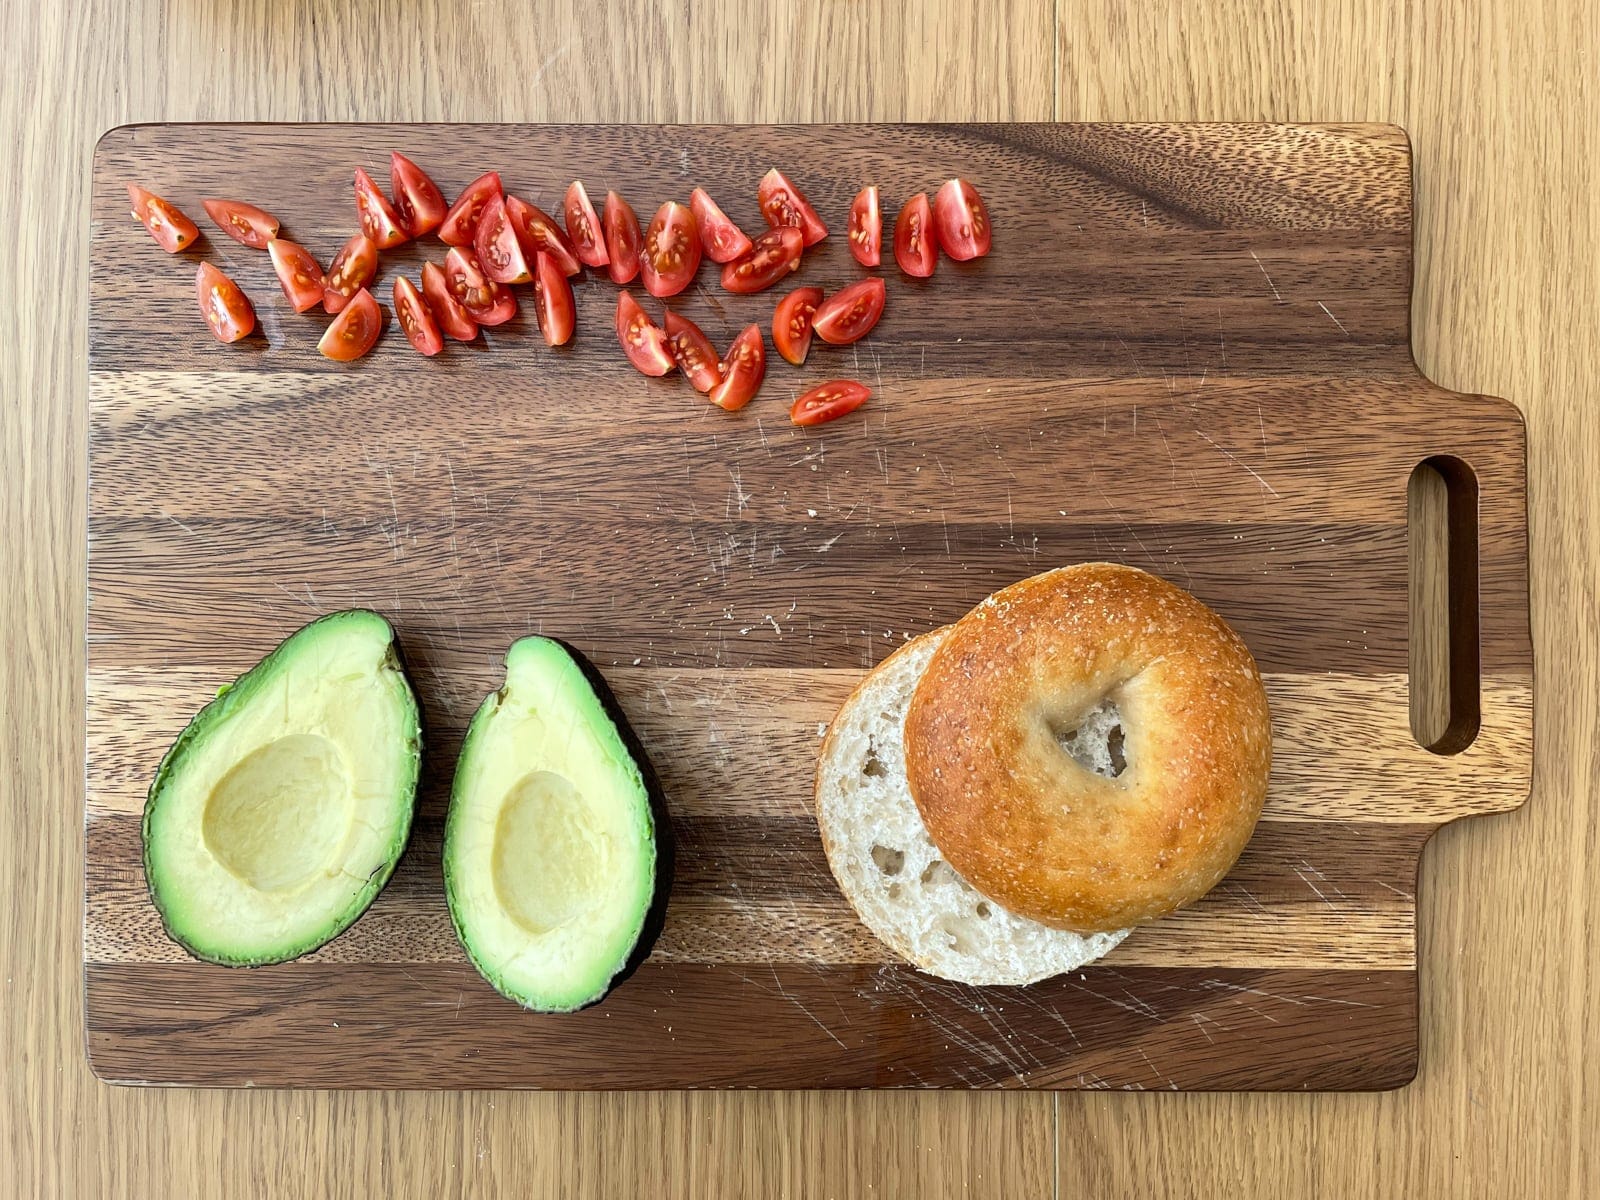 A wooden chopping board with wedges of sliced cherry tomato, a cut open avocado, and a bagel cut in half